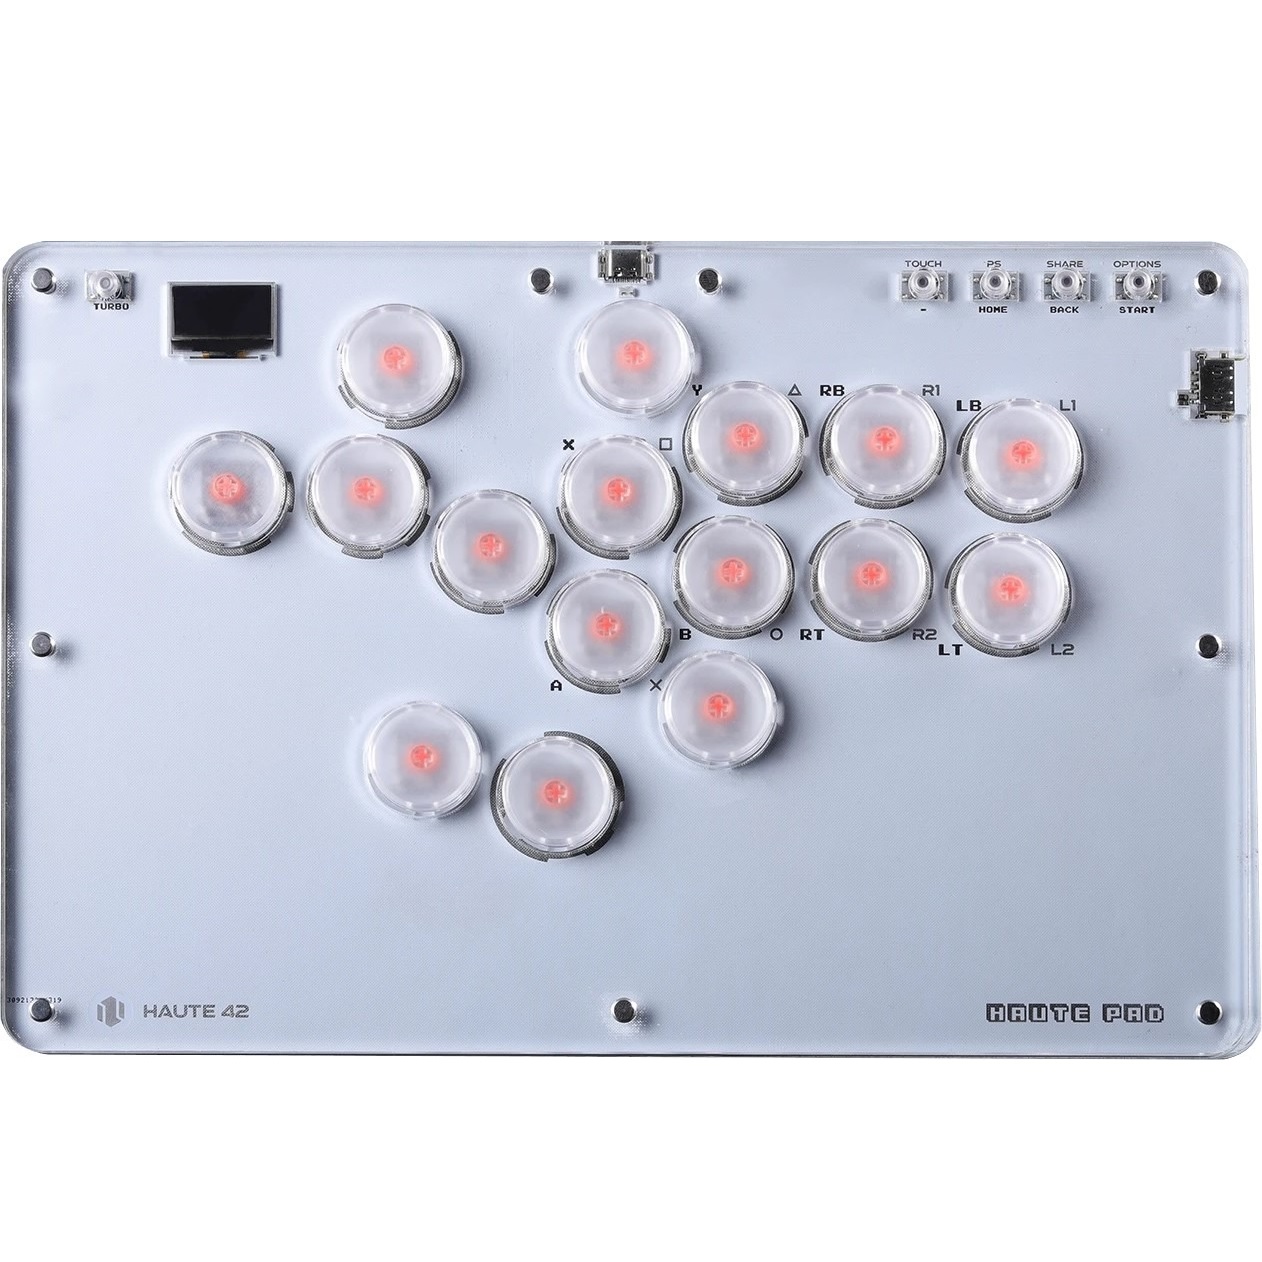 Haute42 T16 Mini Arcade Stick Controller For Ps4 Ps5 Nintendo Switch &  Steam Deck (Imported)